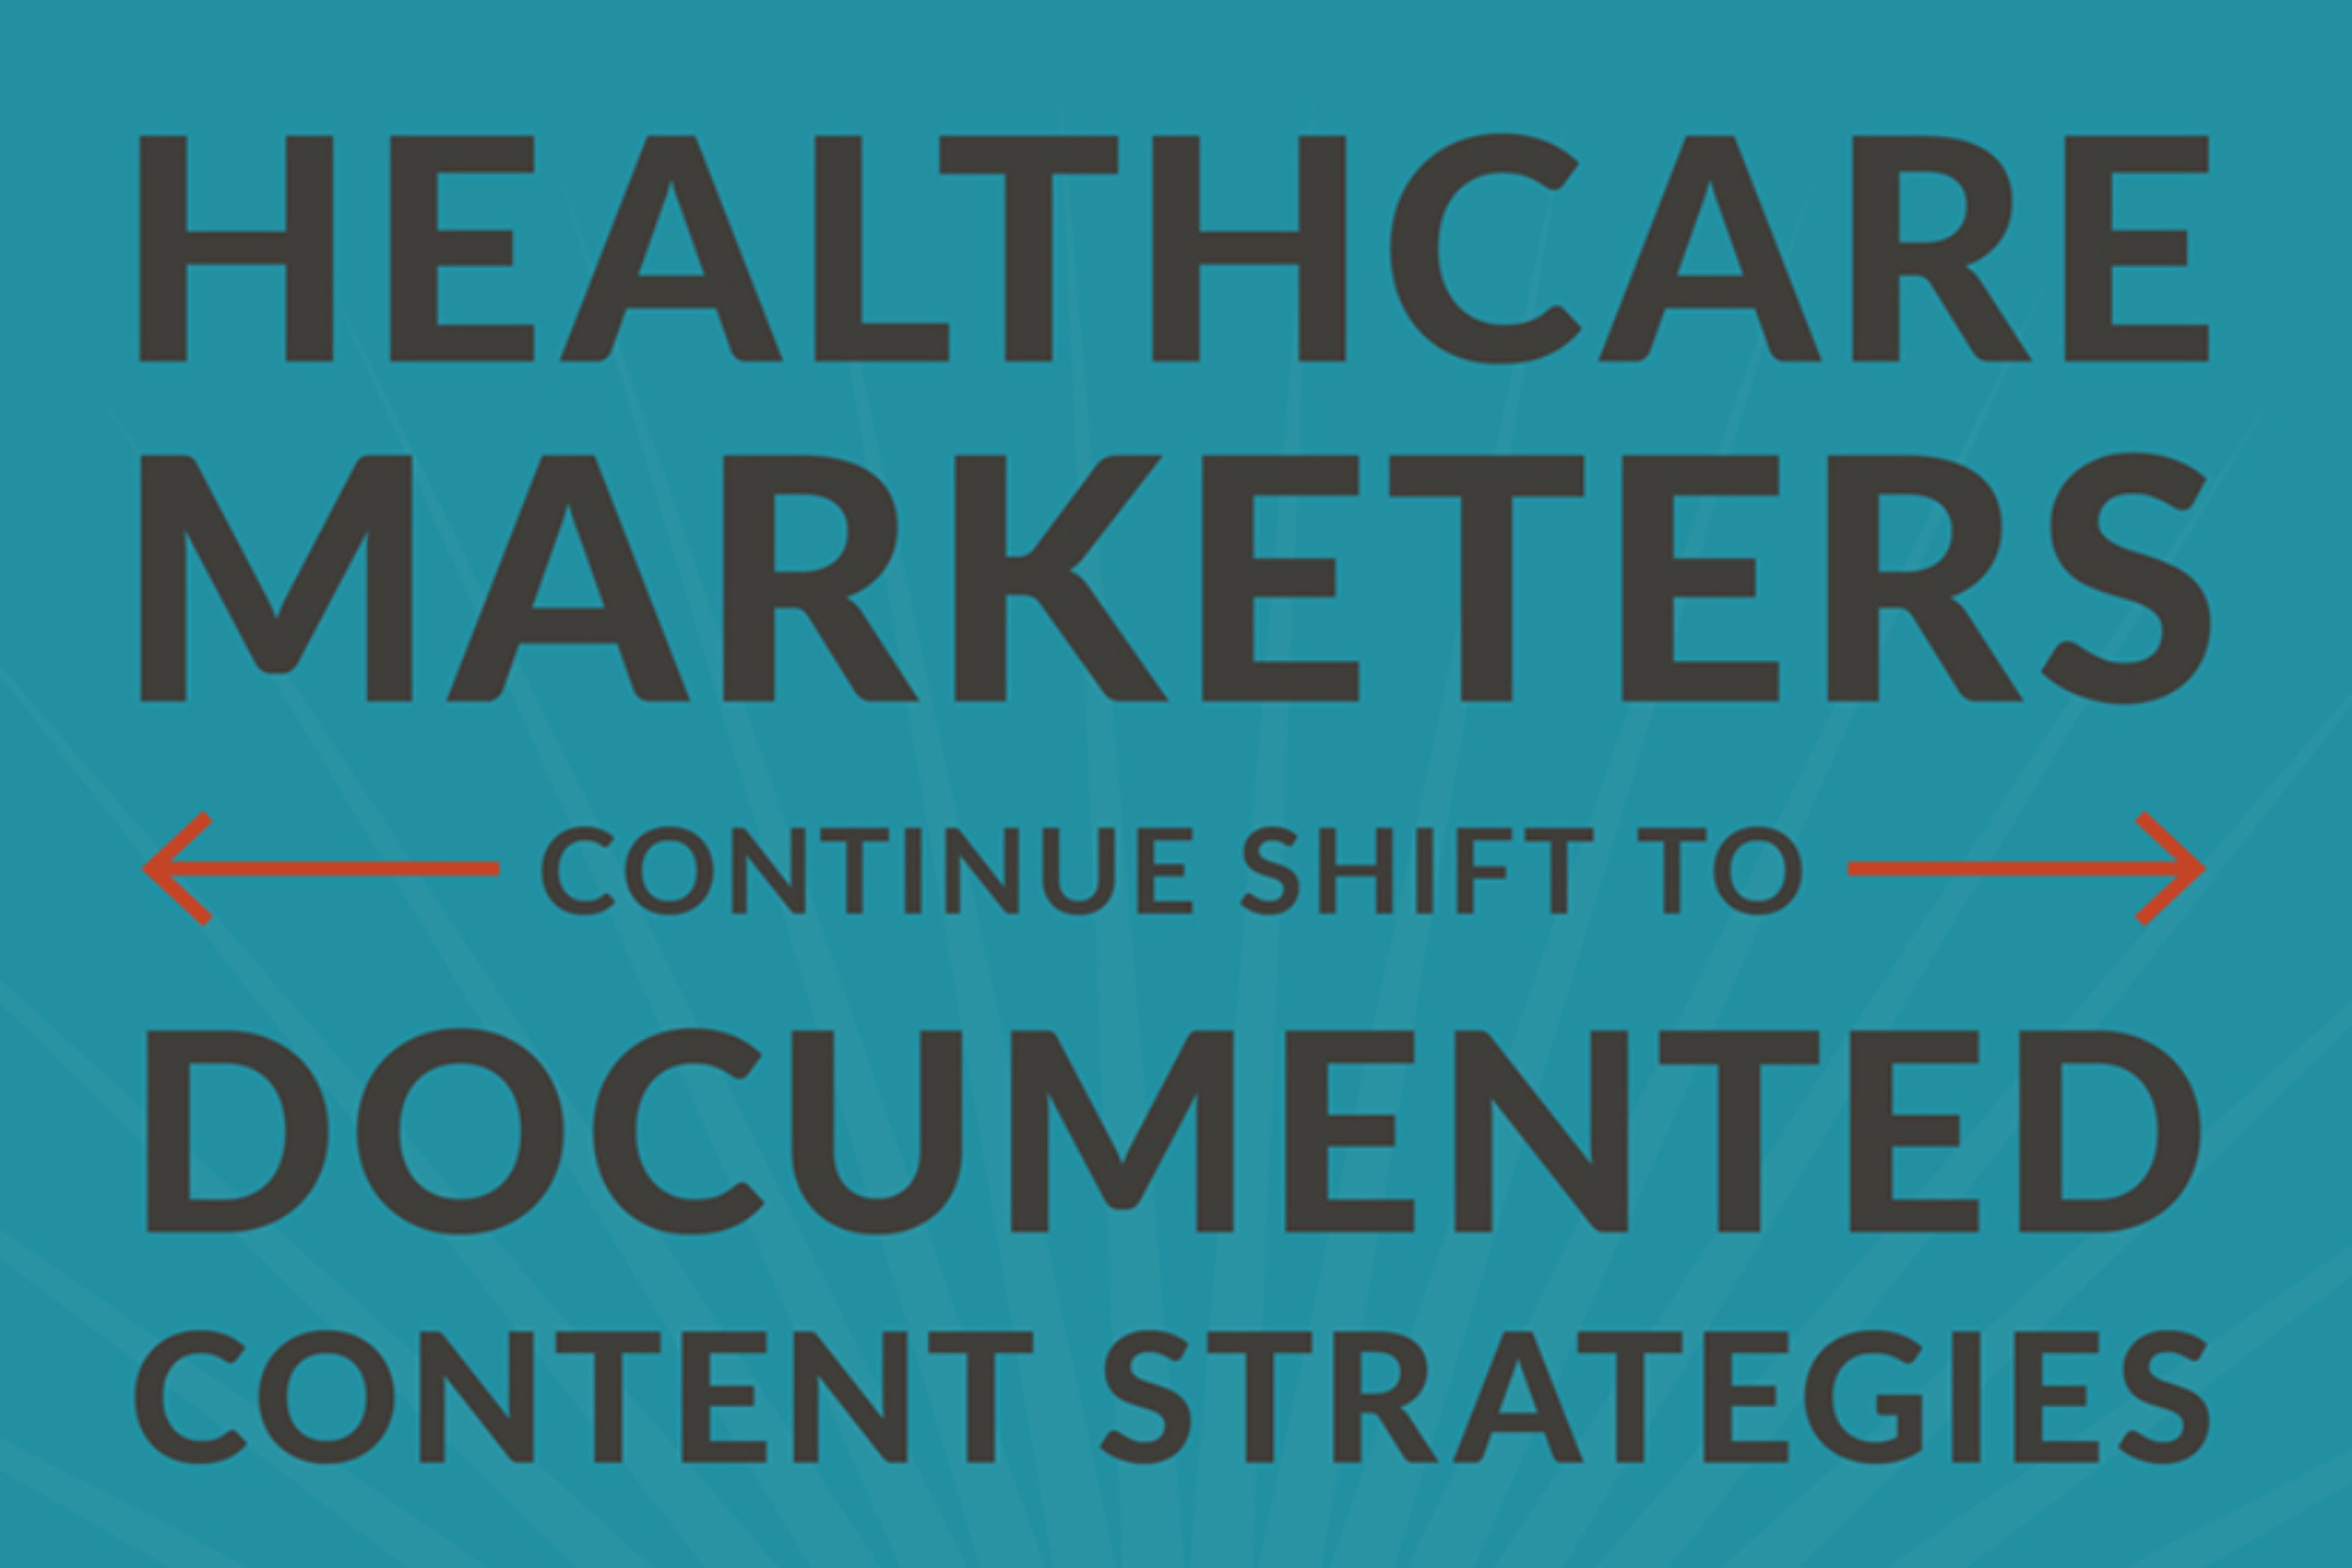 Healthcare Marketers Shift To Documented Content Strategies